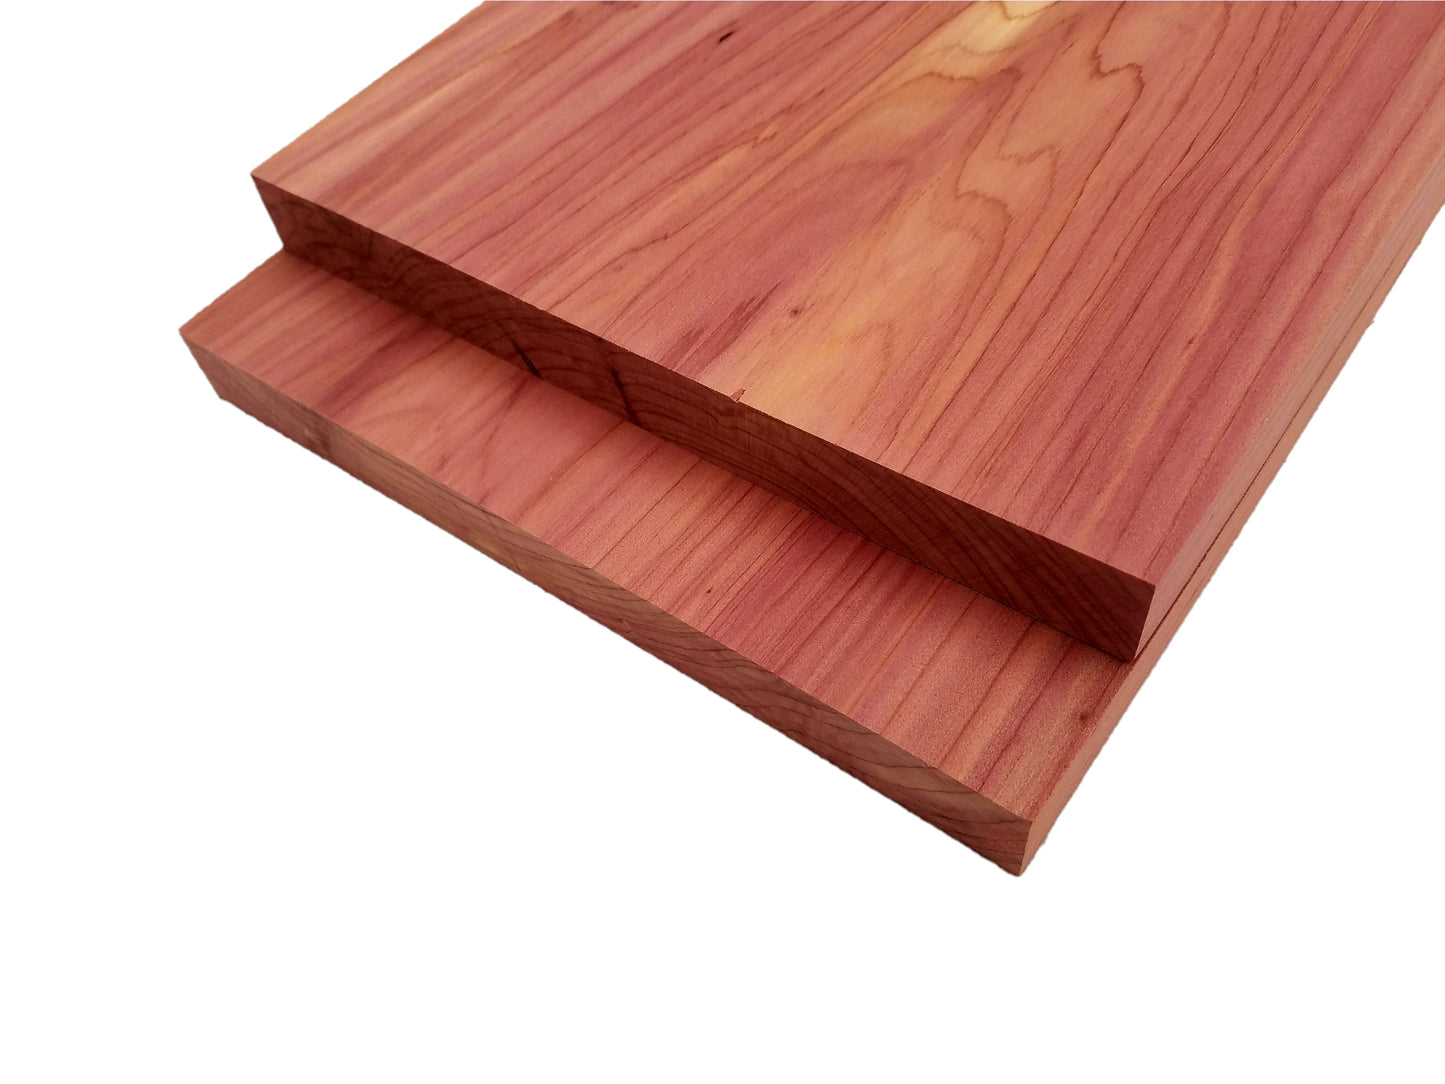 Aromatic Cedar two sides sanded to 3/4" thickness, 8" wide